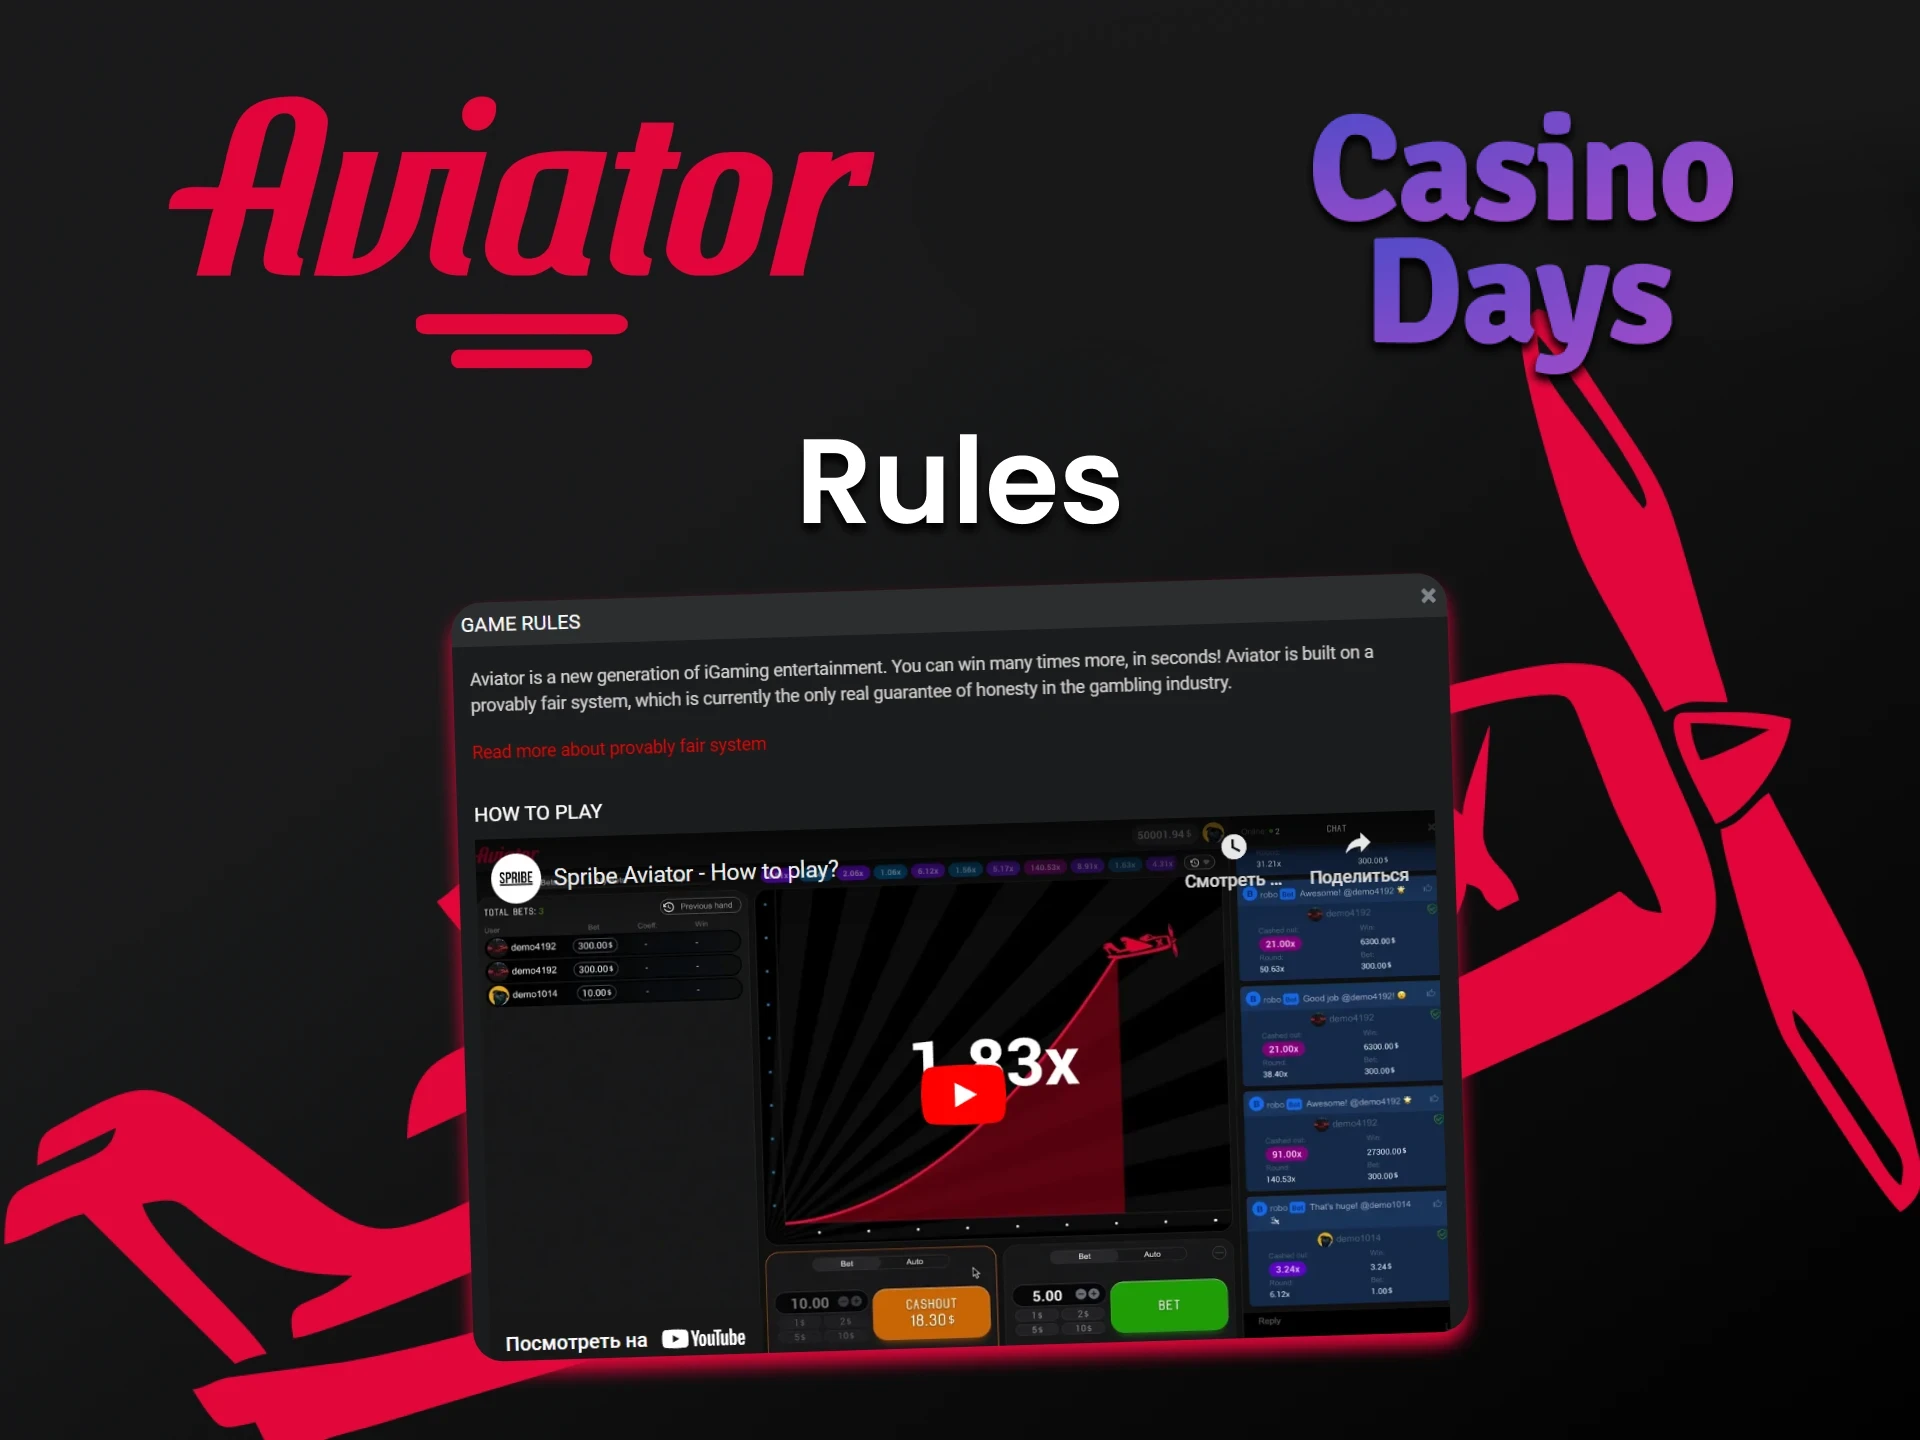 Learn the rules of the Aviator game at Casino Days.